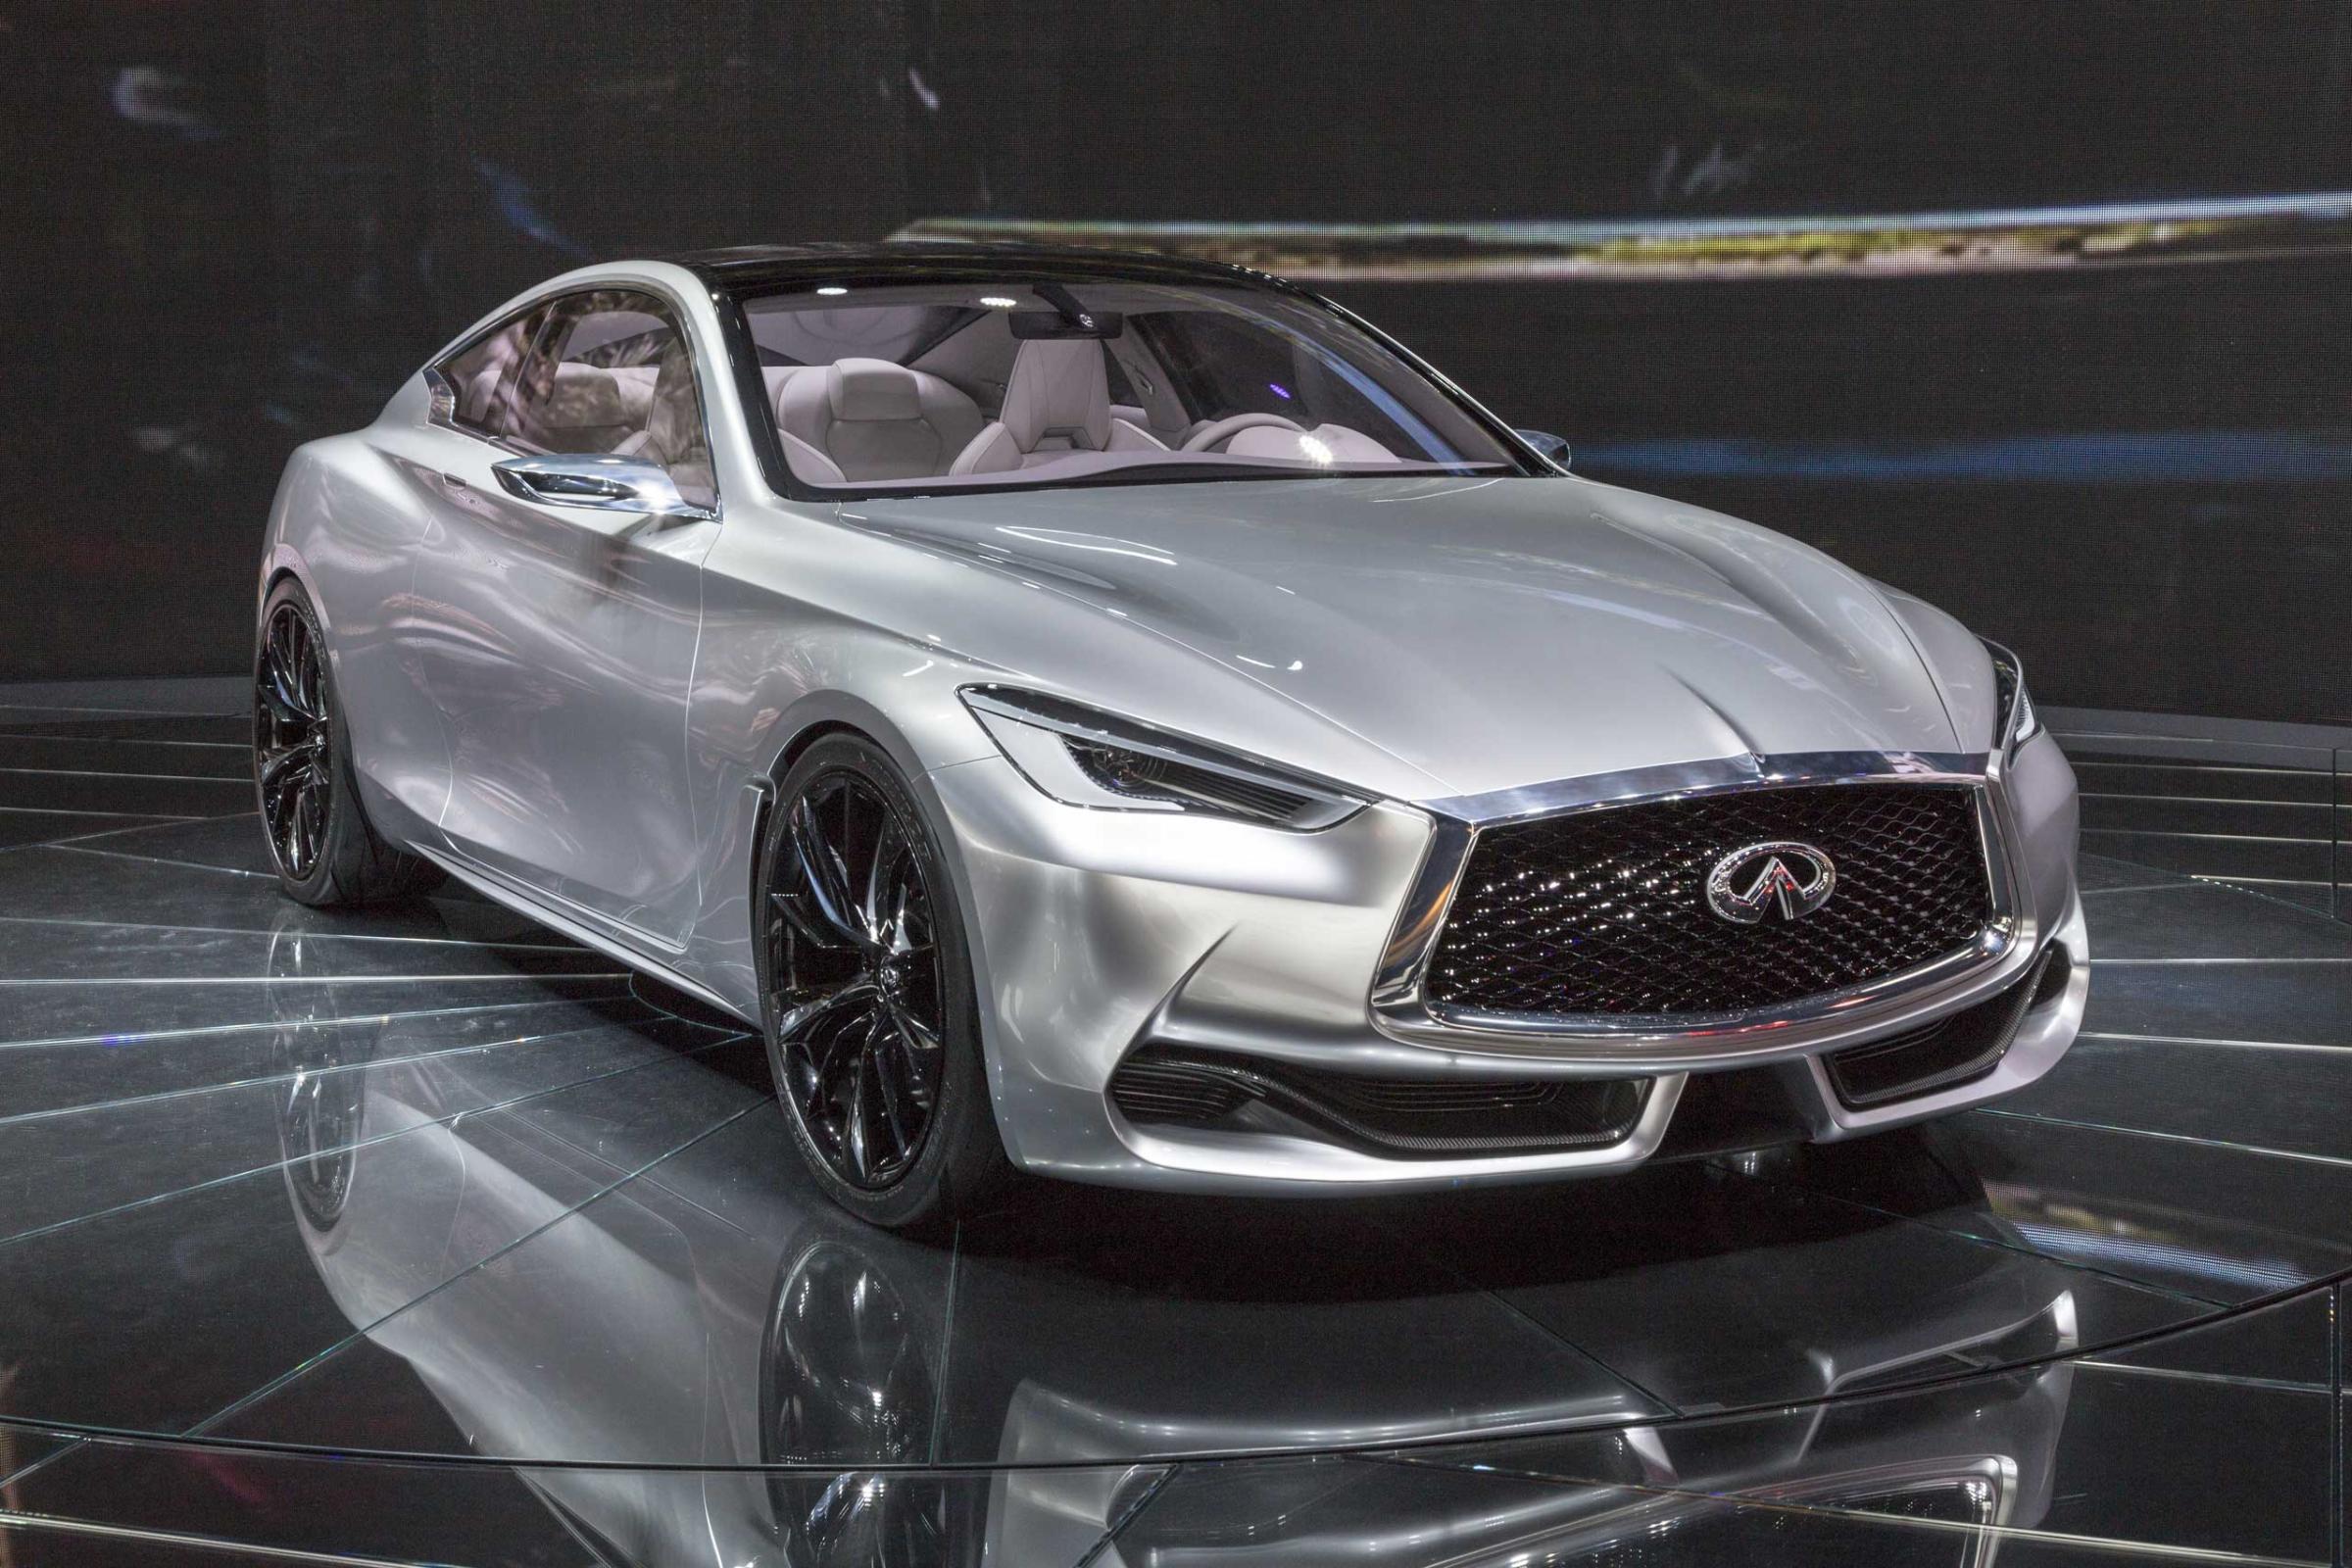 Scheduled for release in 2016, the Infiniti Q60 Coupe will have a turbocharged 3.0-liter V6 in a stunning aluminum body on Jan. 12, 2015 in Detroit.